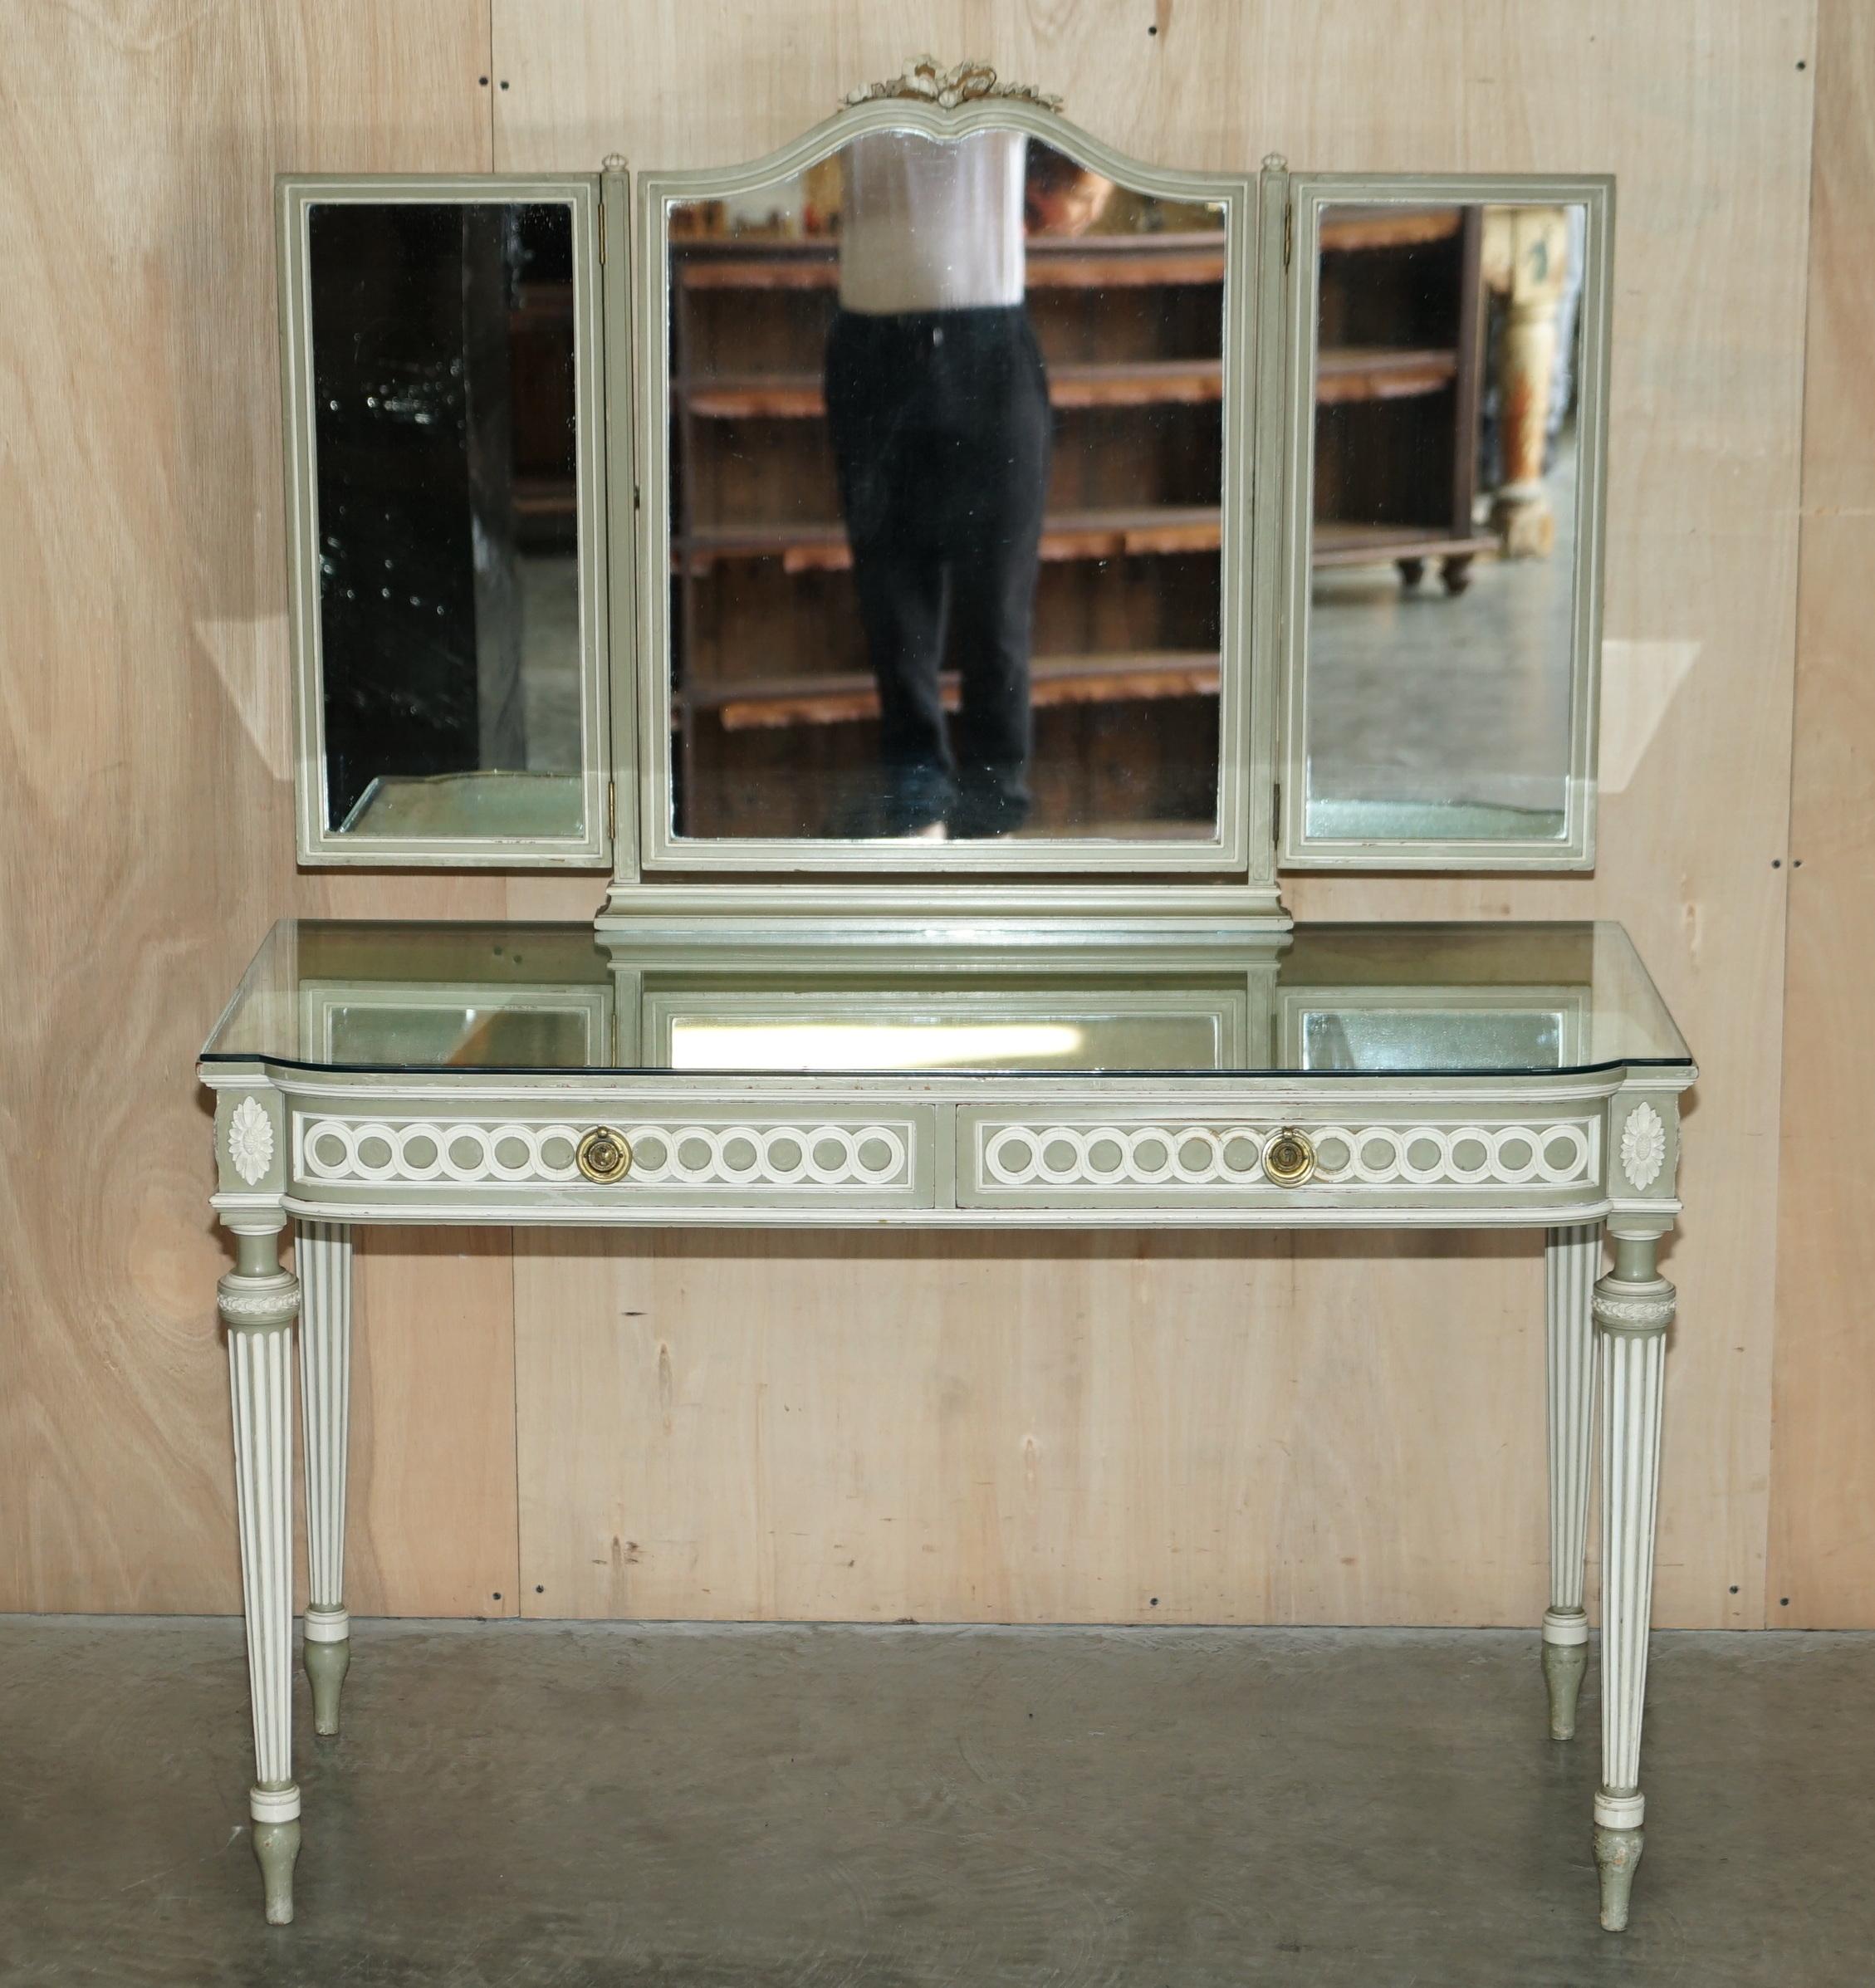 We are delighted to offer for sale this original Antique fully stamped Mellier & Co made, George Hilton & Son’s retailed Anglo French Shabby Chic dressing table which is part of a set.

I have the matching, large single mirror door wardrobe listed